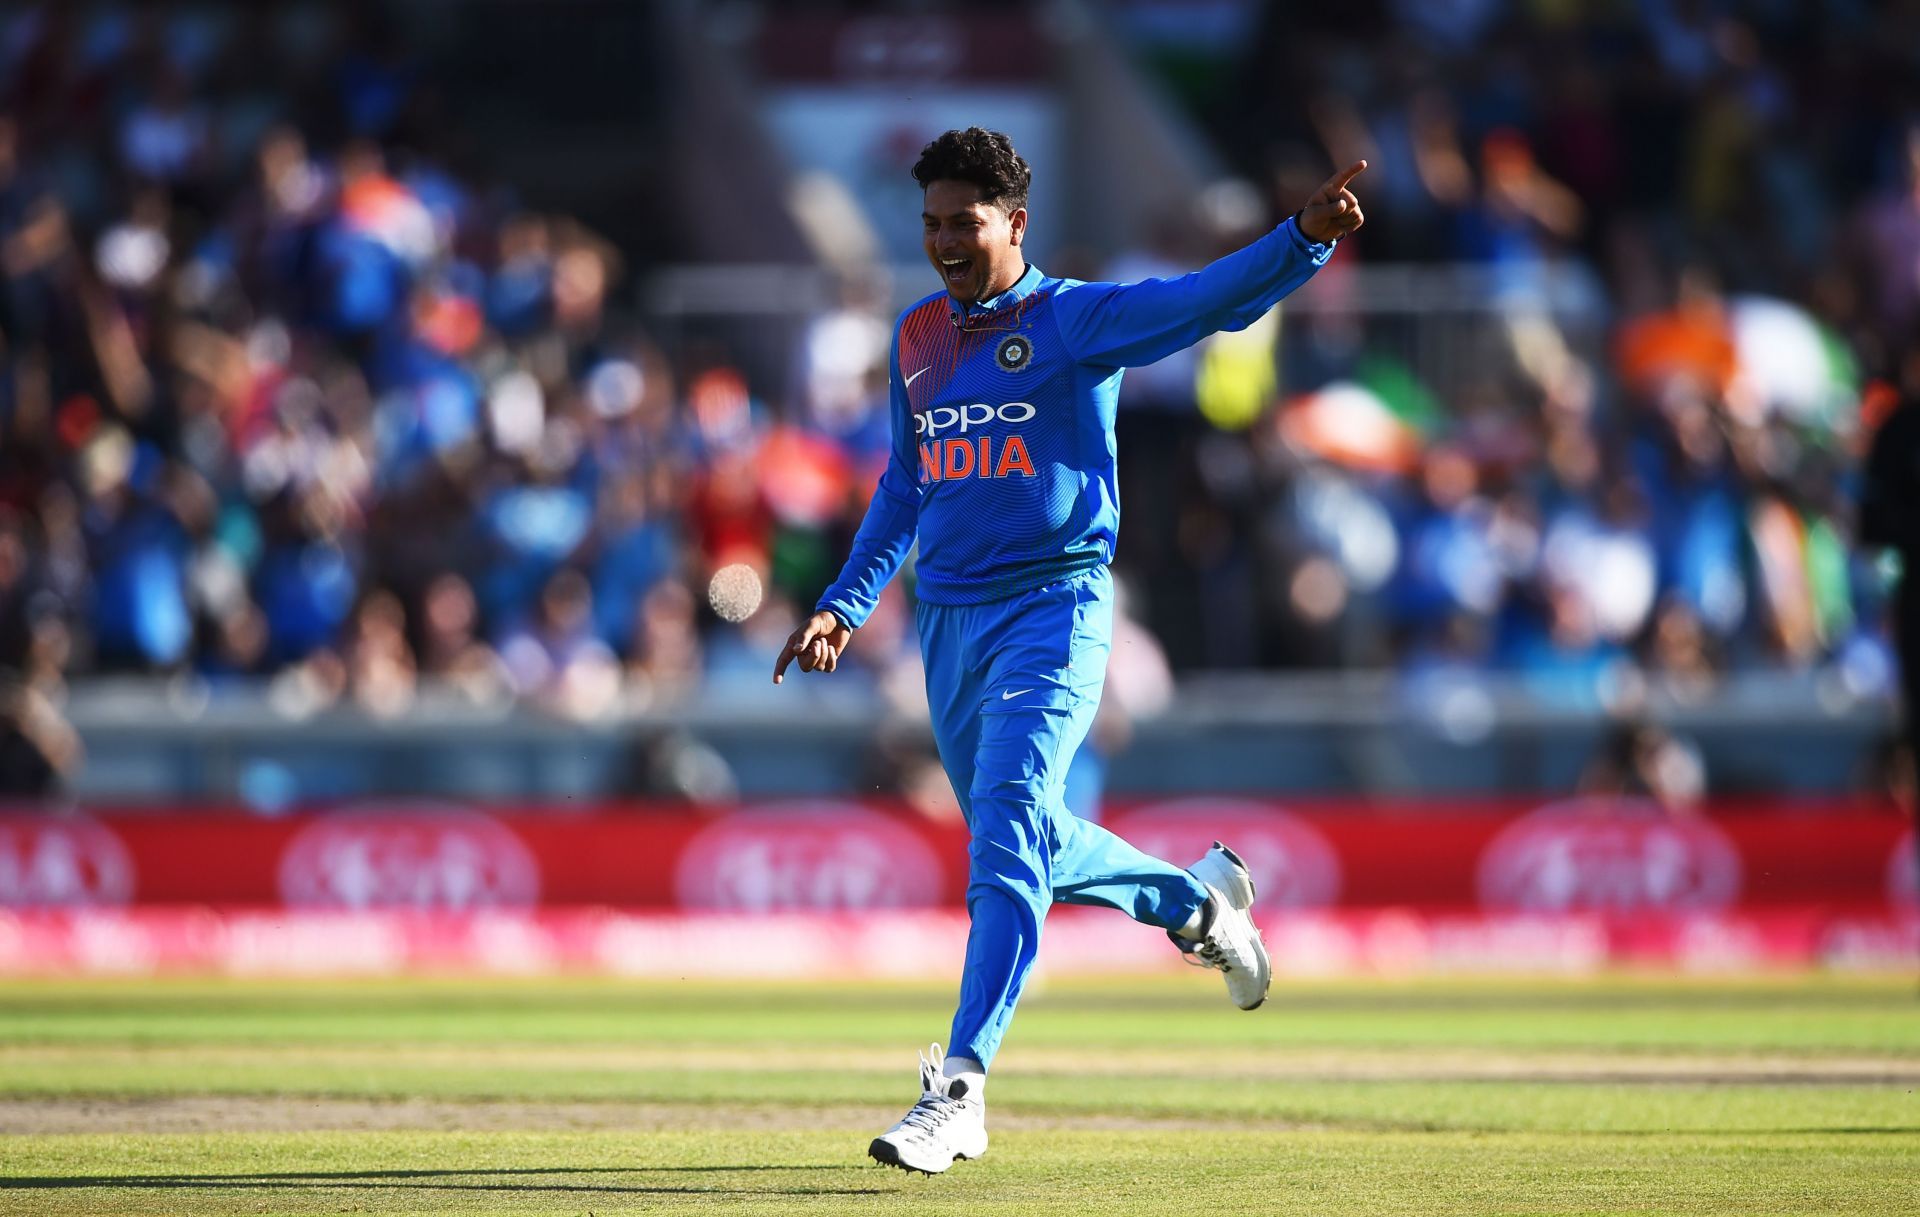 Kuldeep Yadav will be eyed by a few franchises in the IPL 2022 Auction.